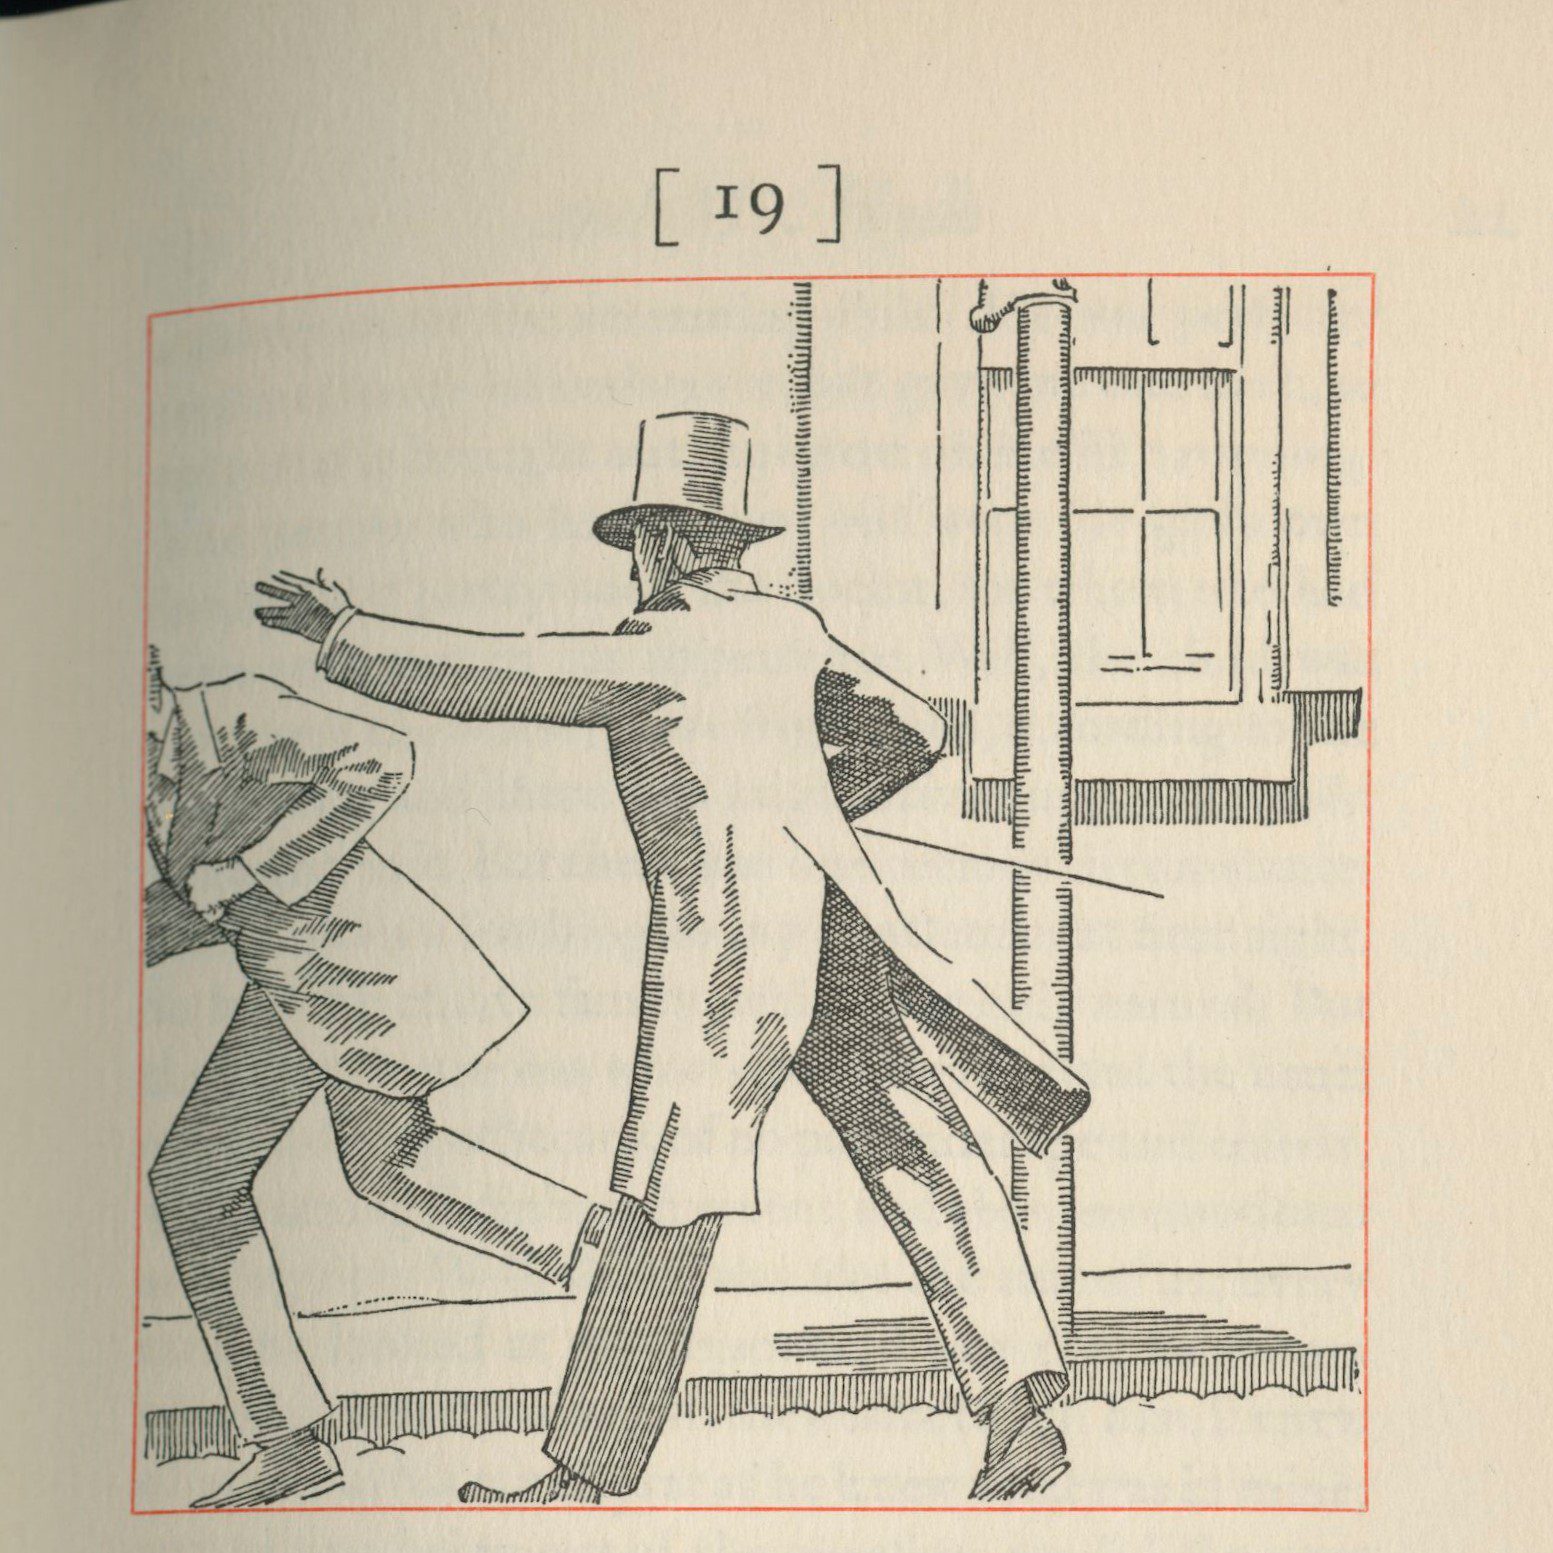 Illustration from Dr. Jekyll and Mr. Hyde depicting a well dressed man shoving another man.